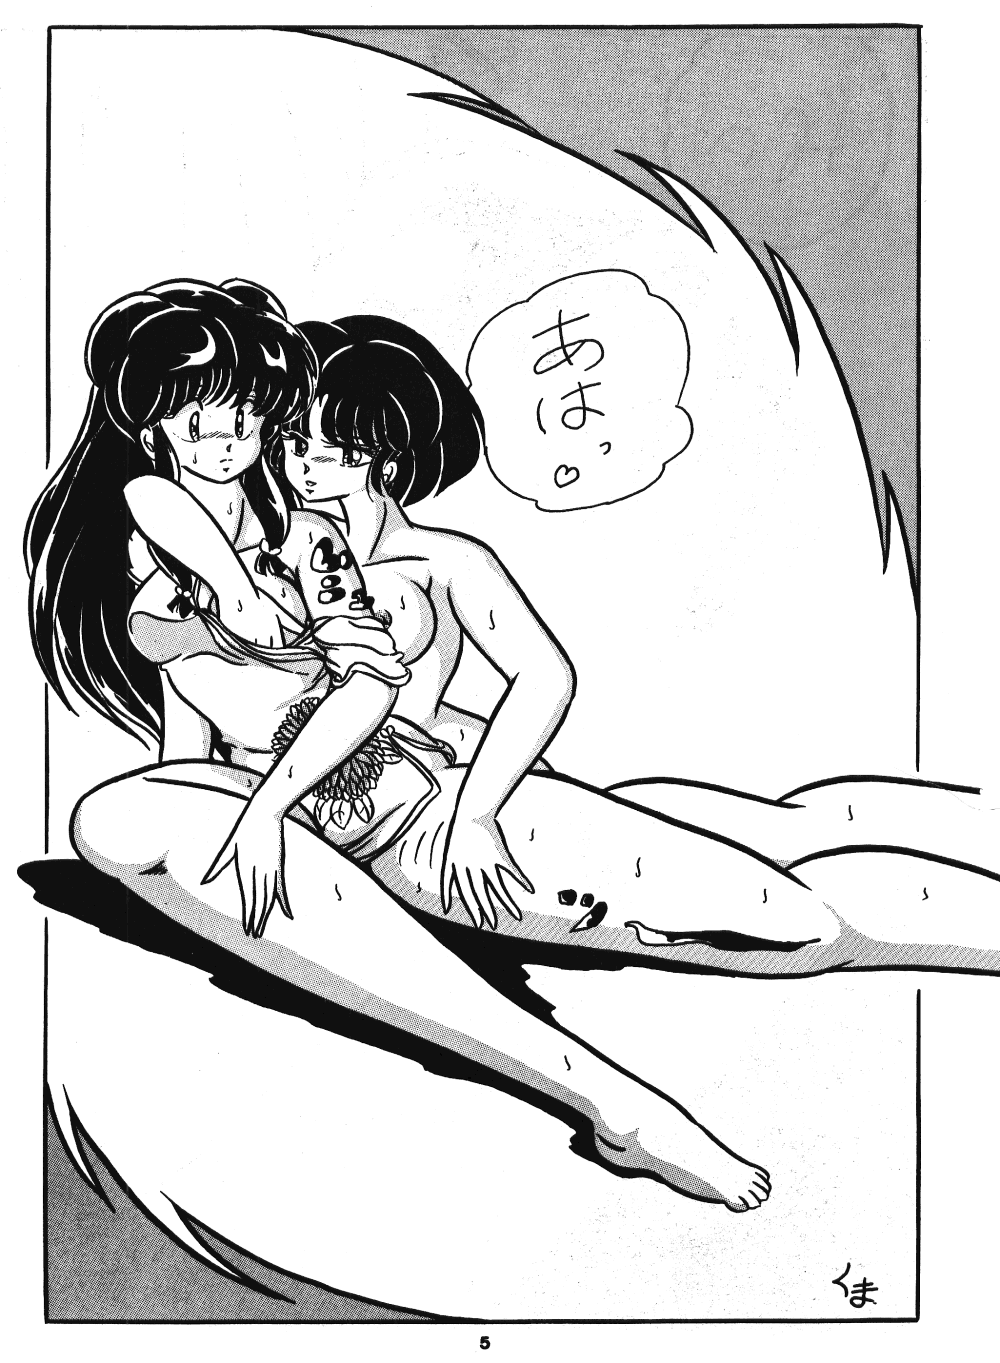 [C-COMPANY] C-COMPANY SPECIAL STAGE 2 (Ranma 1/2) page 6 full